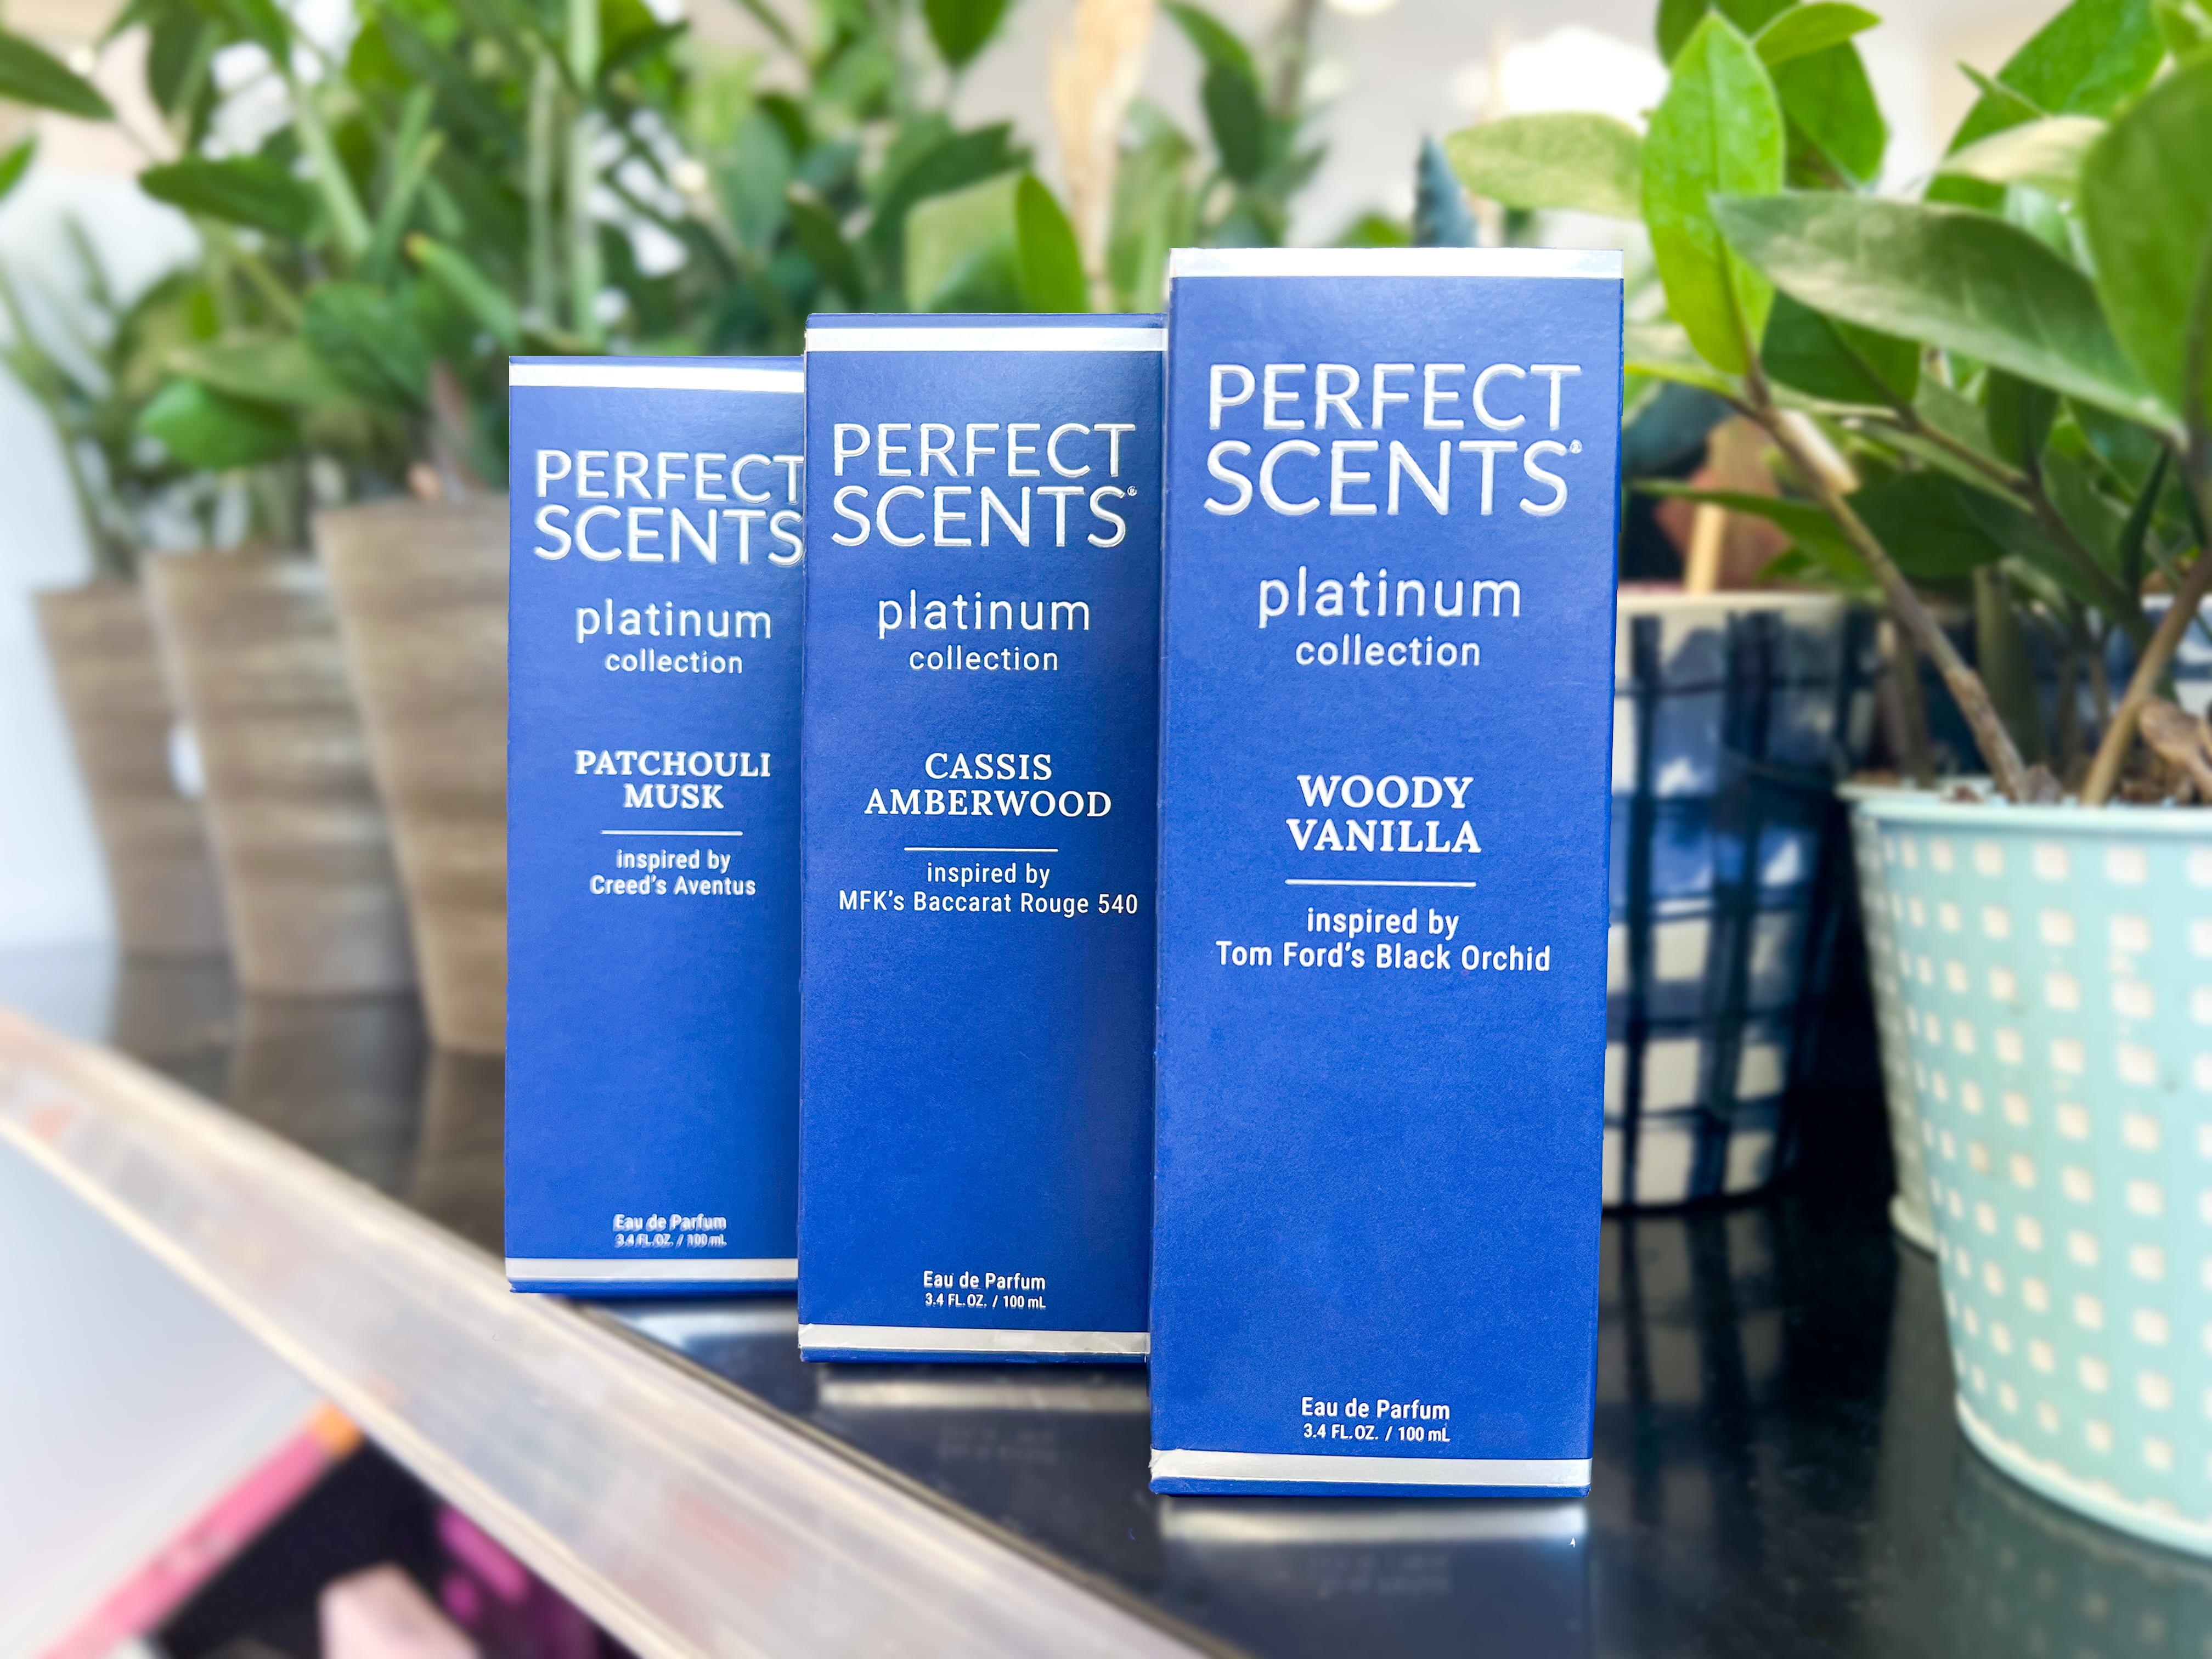 Best Perfume Dupes at CVS: NEW Perfect Scents Platinum Collection